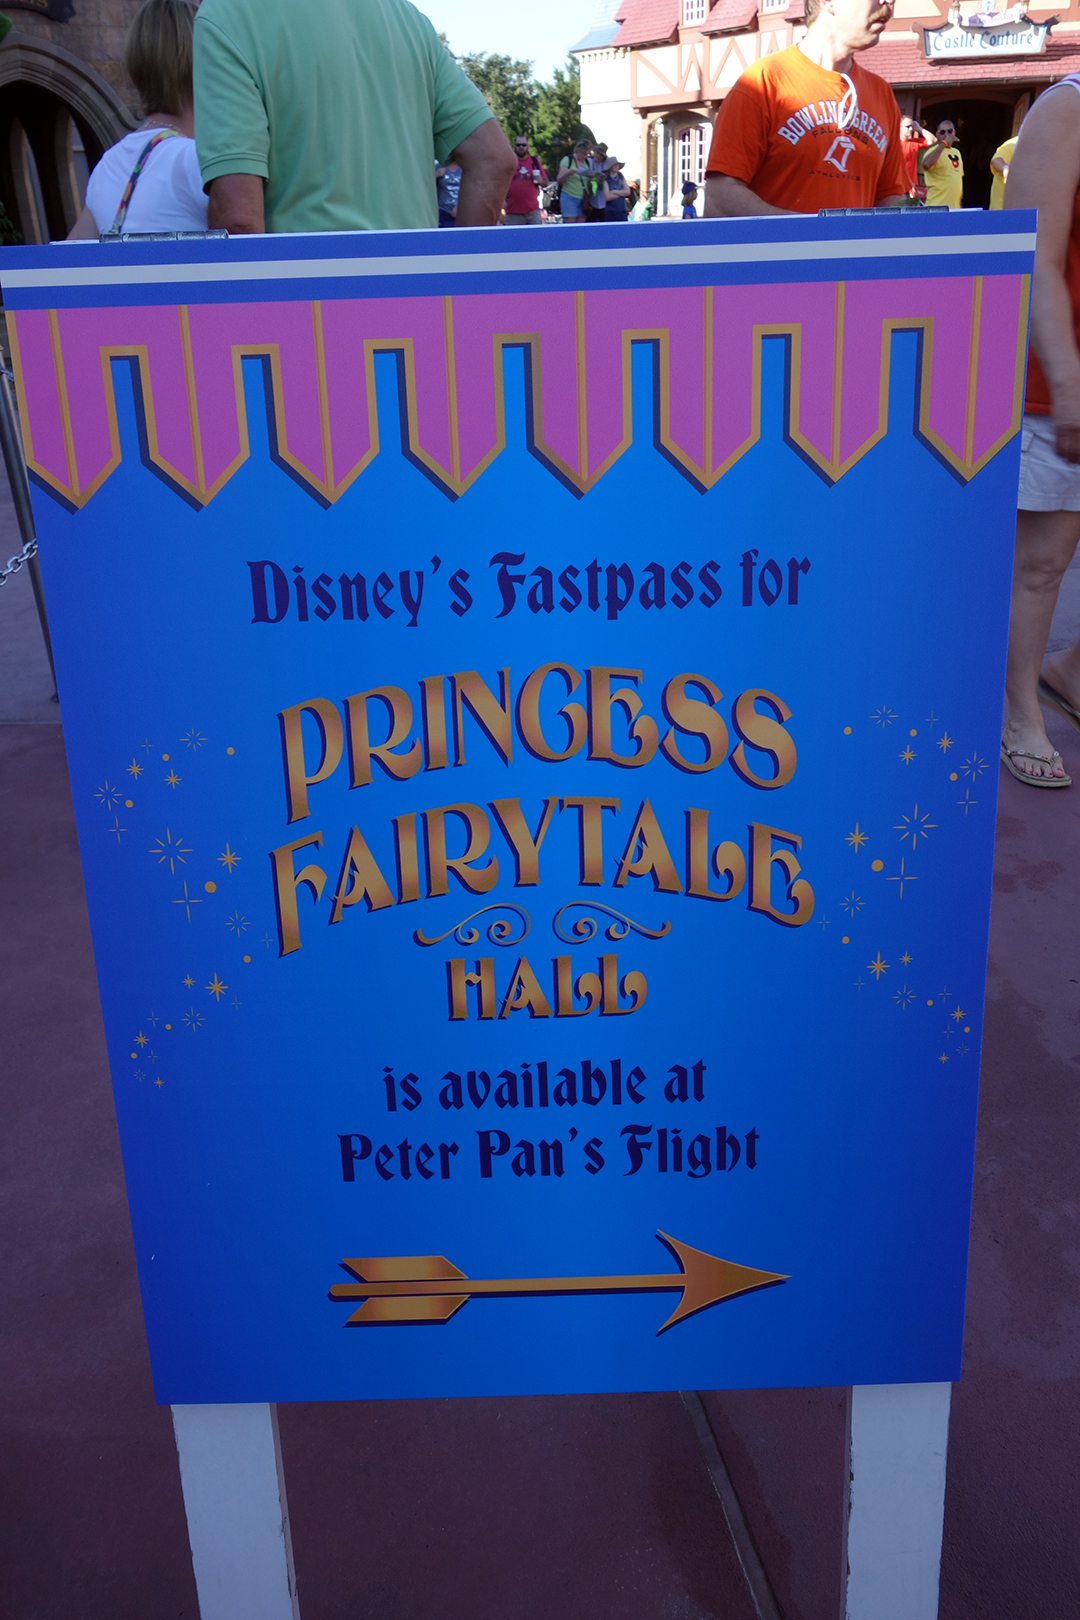 There's a sign right in front of Fairytale Hall directing you to the Fastpass location. It uses TWO of the Peter Pan's Flight Fastpass machines.